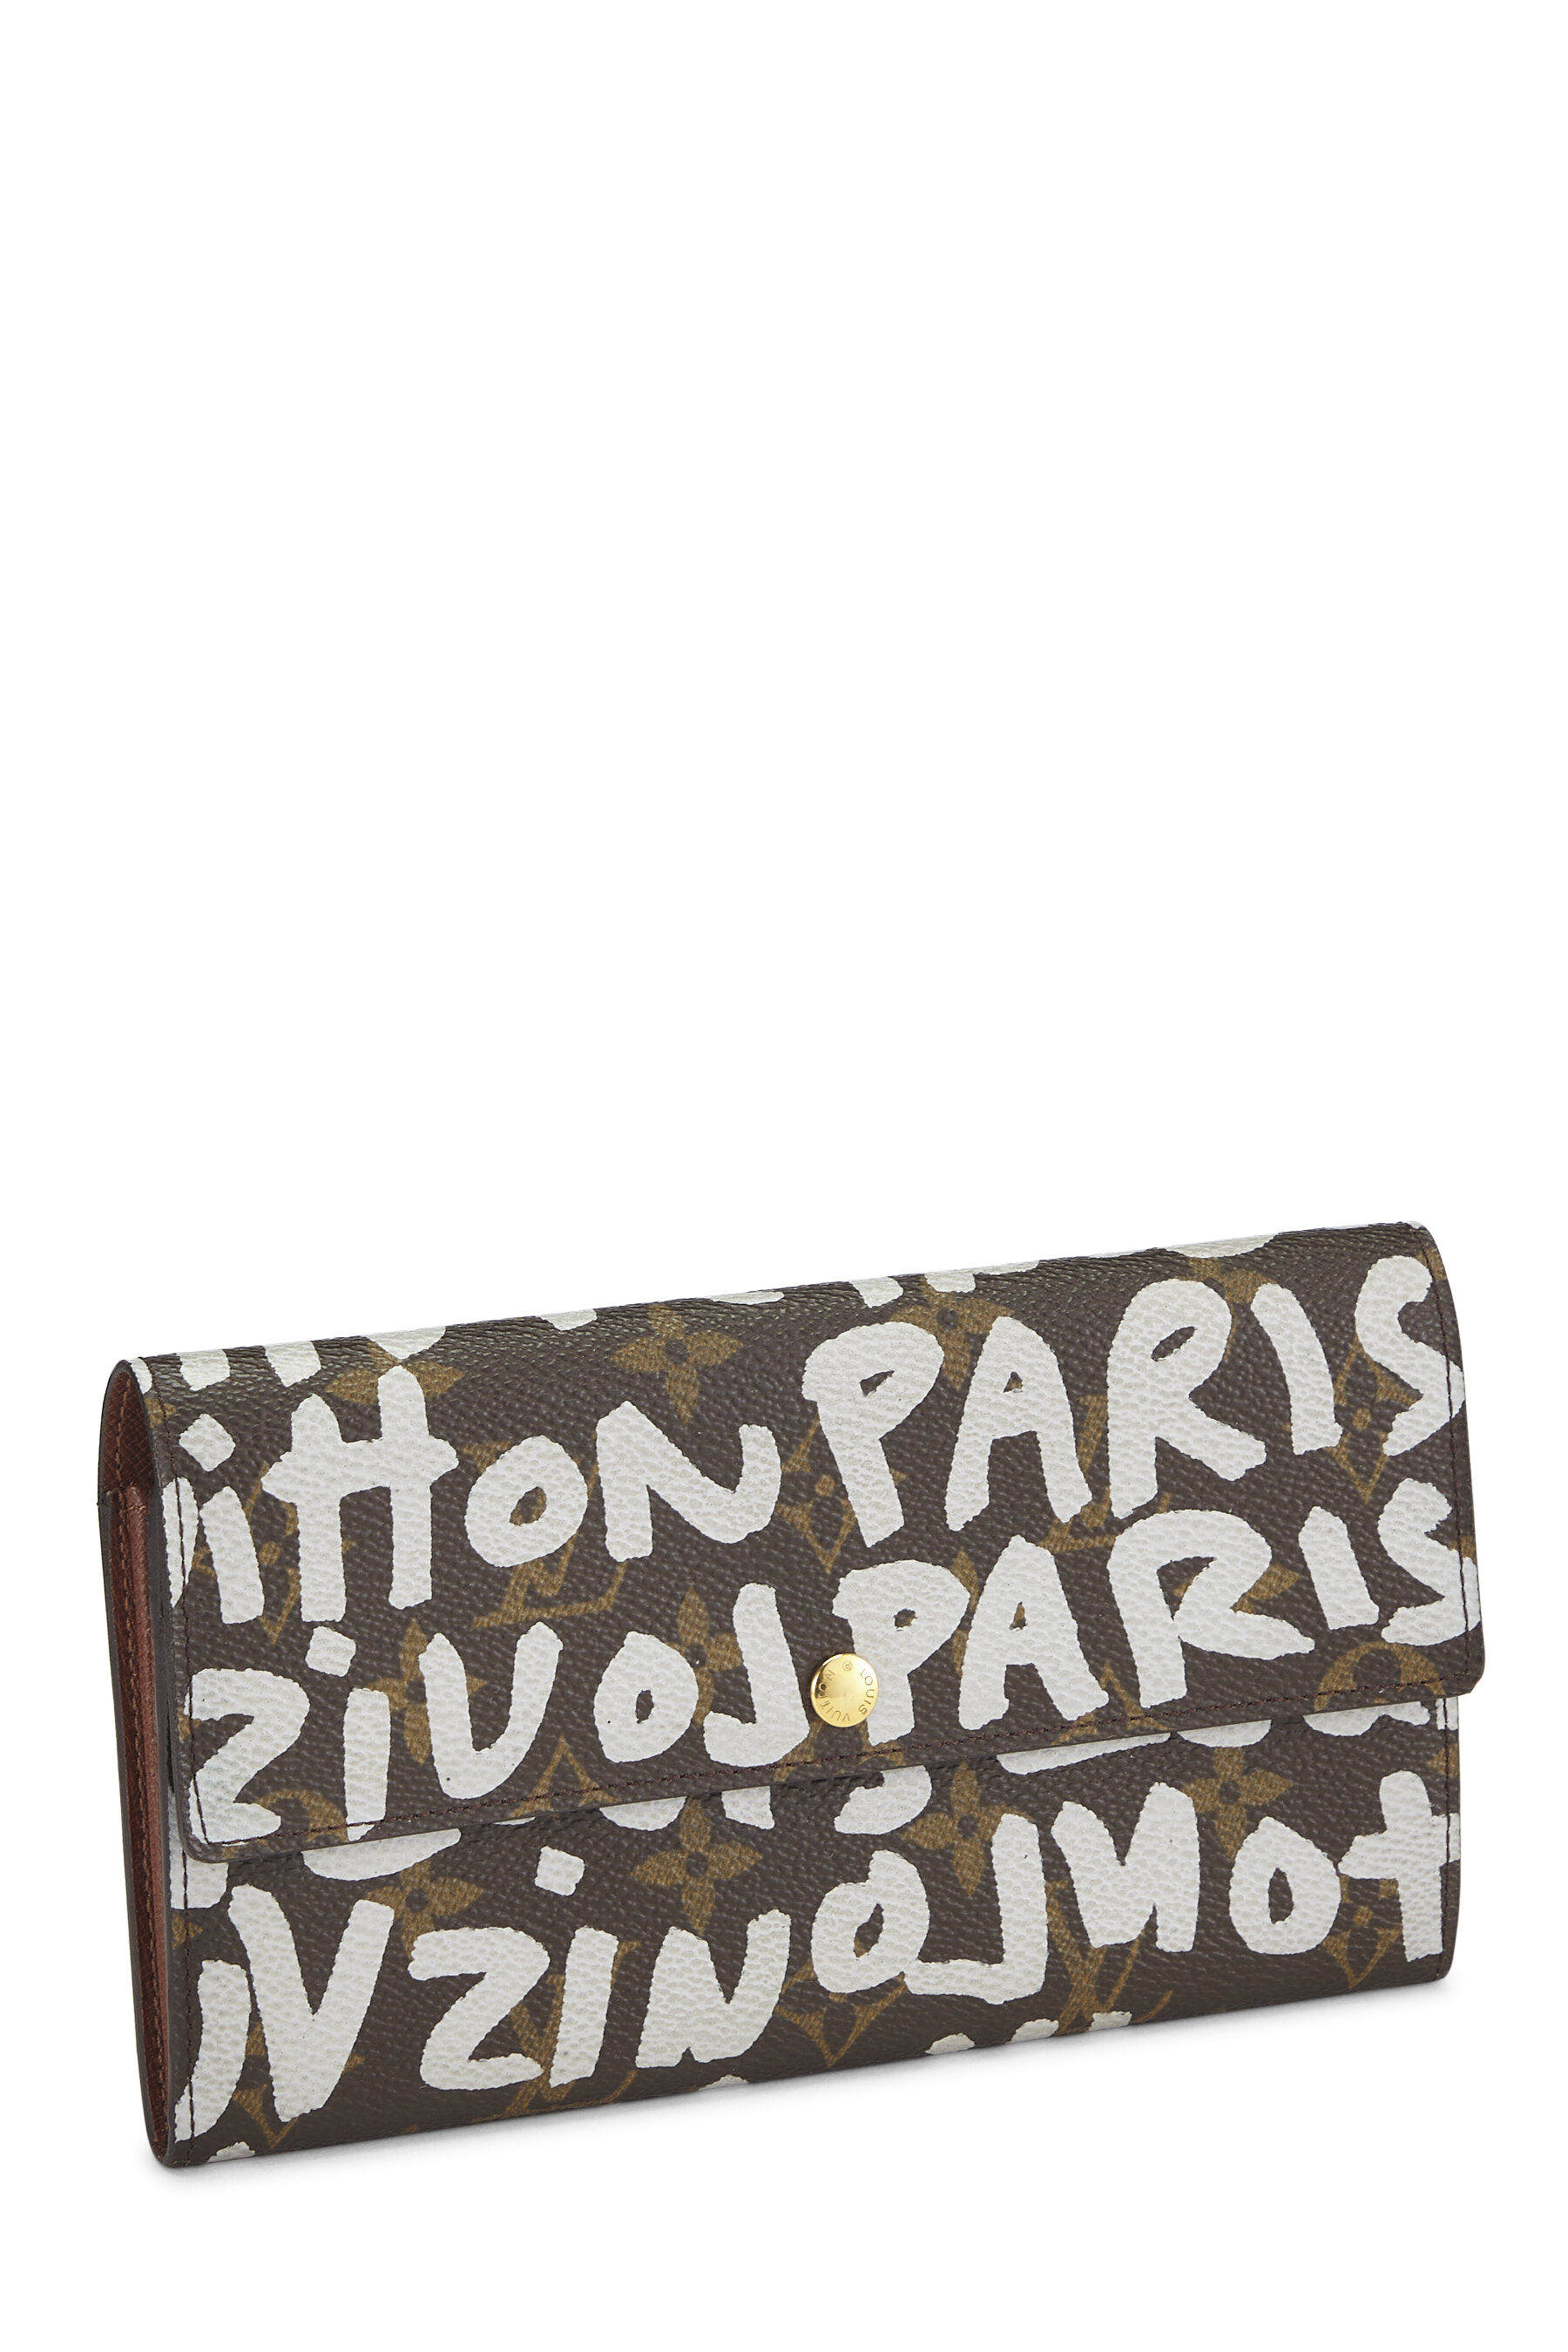 Sold at Auction: Stephen Sprouse Louis Vuitton Graffiti Wallet